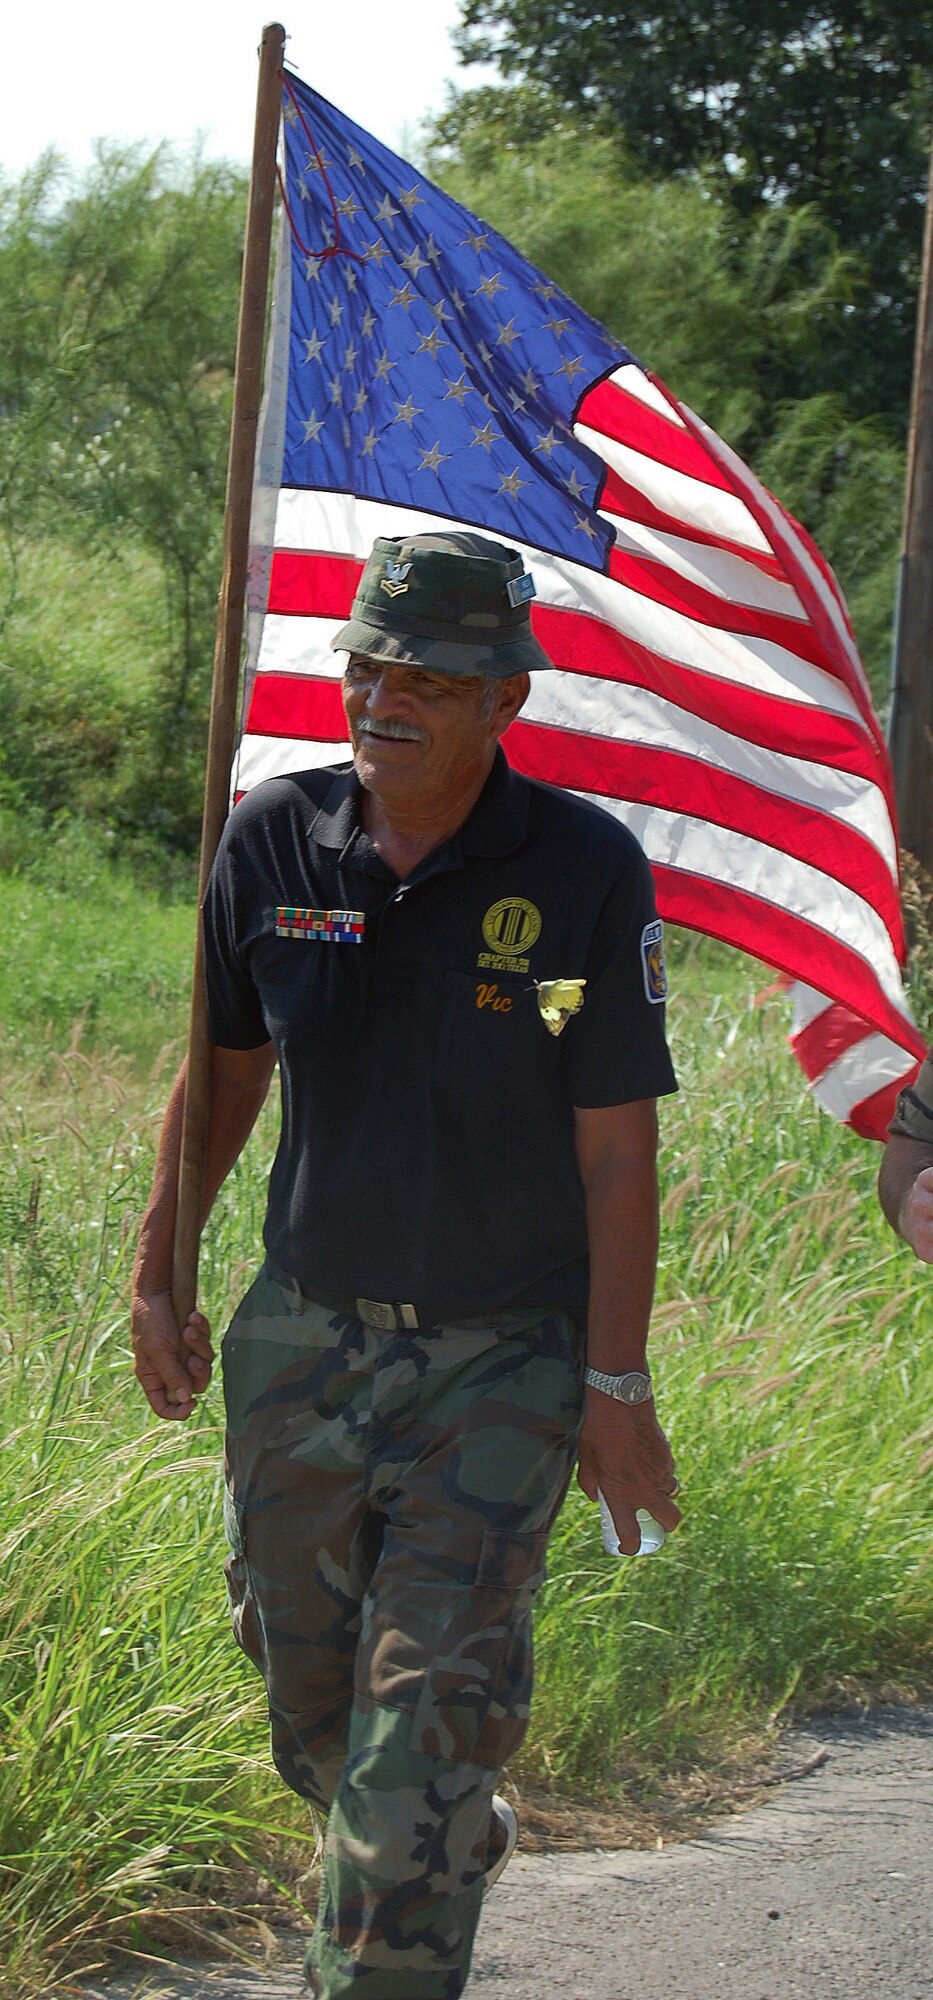 LAUGHLIN AIR FORCE BASE, Texas – Vick Meza, Vietnam Veteran and Del Rio, Texas resident, carries the American Flag proudly as he nears the end of a motivating walk for National POW/MIA Recognition Day Sept. 21. (U.S. Air Force photo by Airman Sara Csurilla)